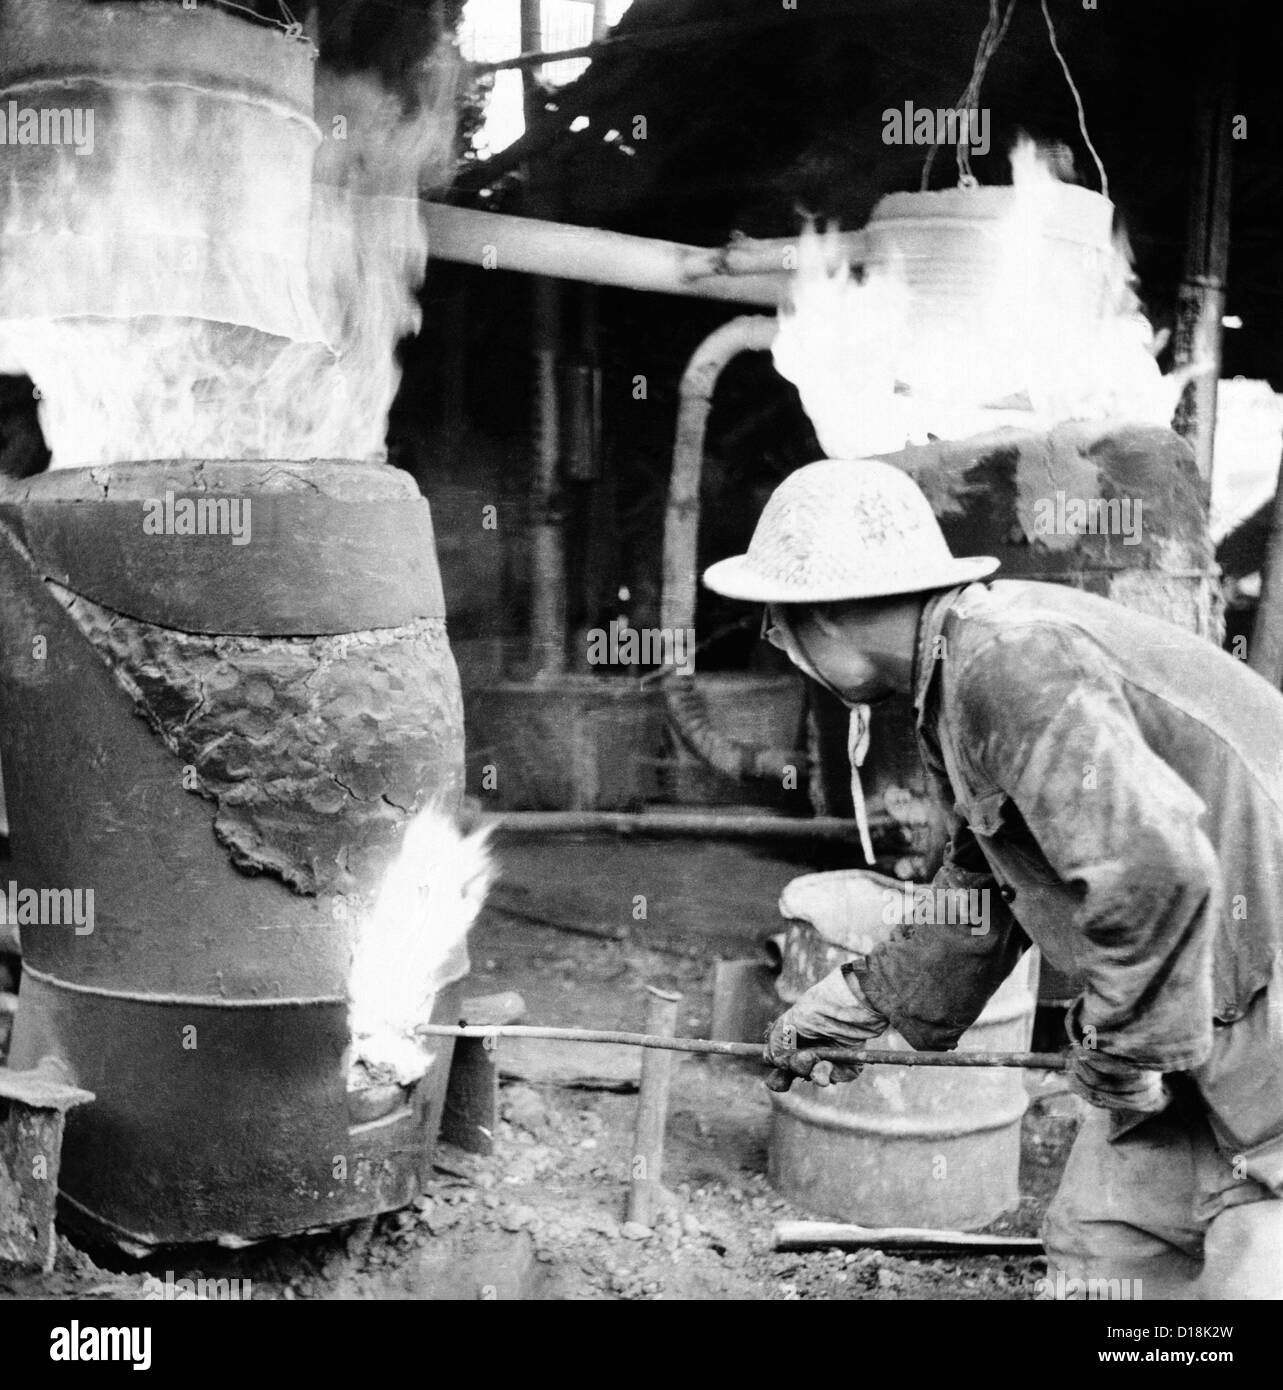 Backyard Furnace In China During The Disastrous Great Leap Forward The Government Encouraged Peasants To Make Small Stock Photo Alamy